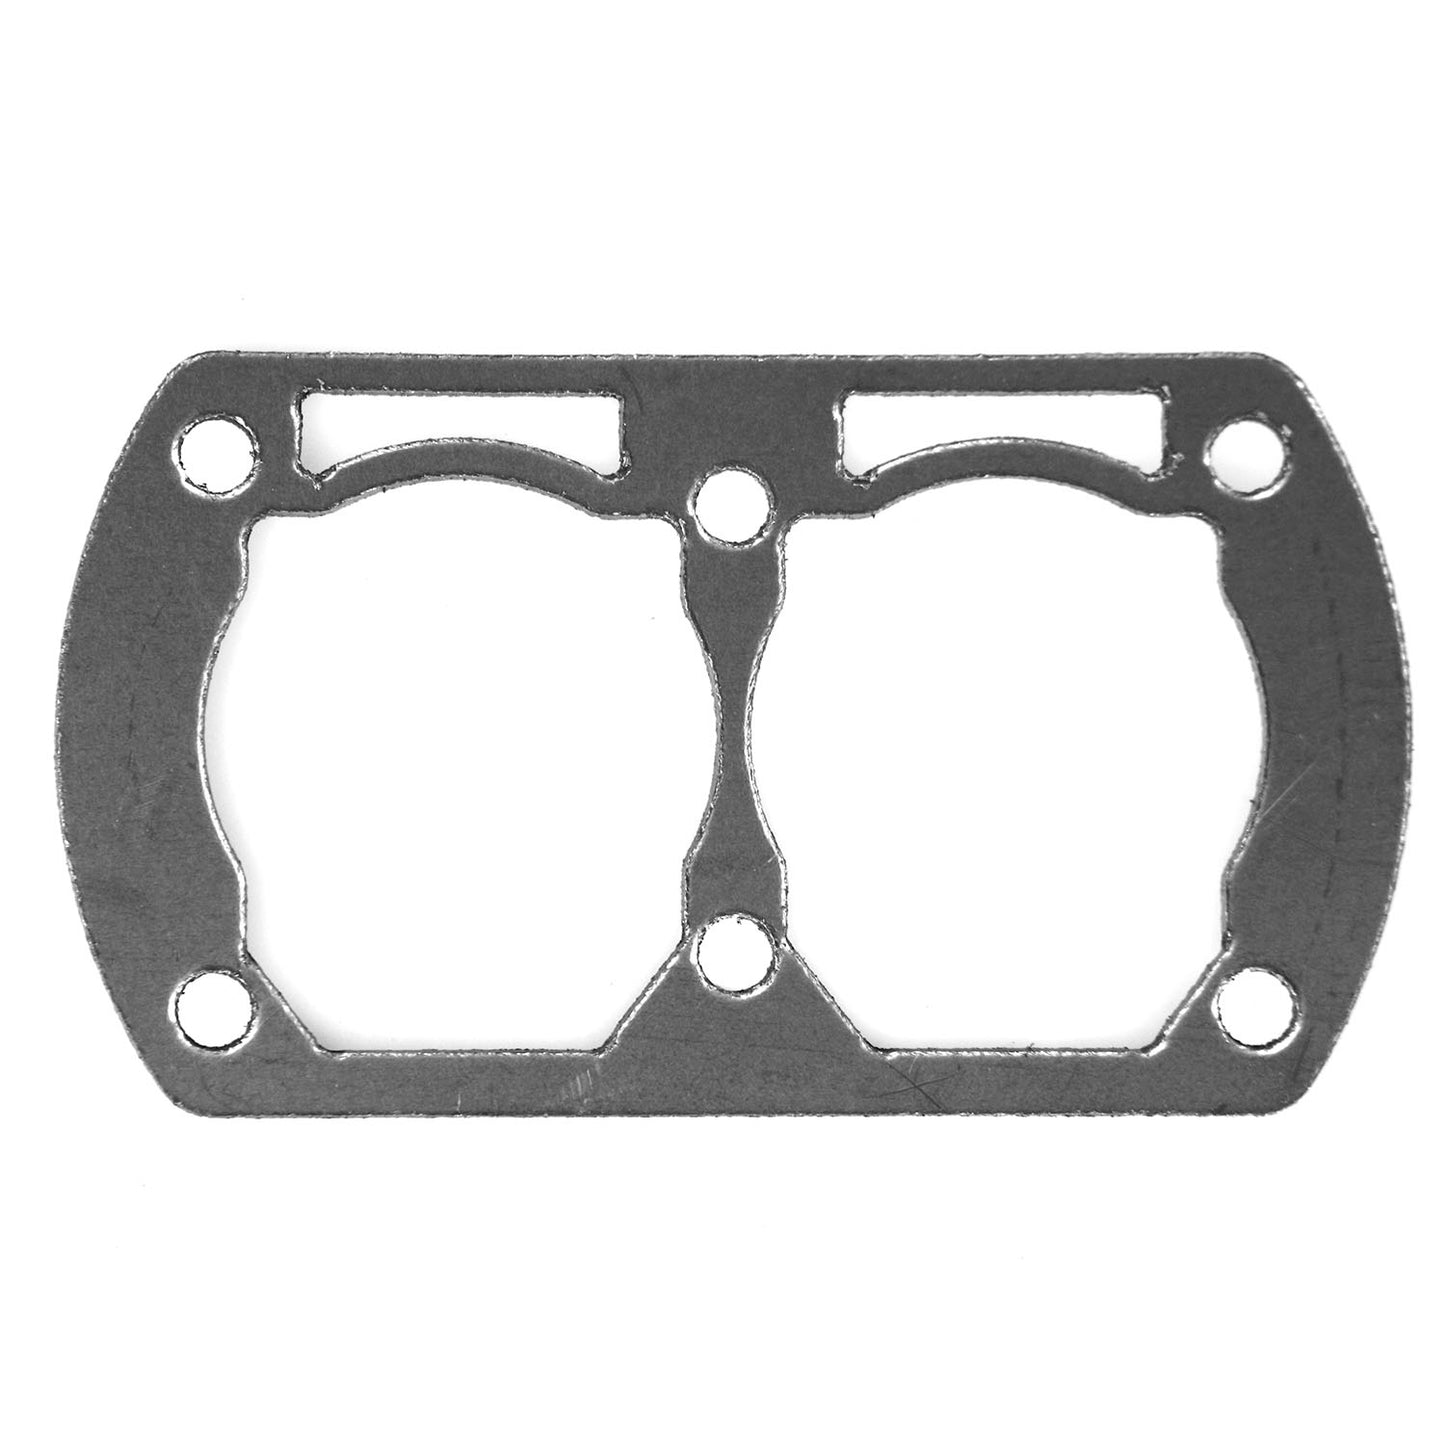 Ingersoll Rand SS3 Valve Plate Gasket Replacement for 97330658 Gasket